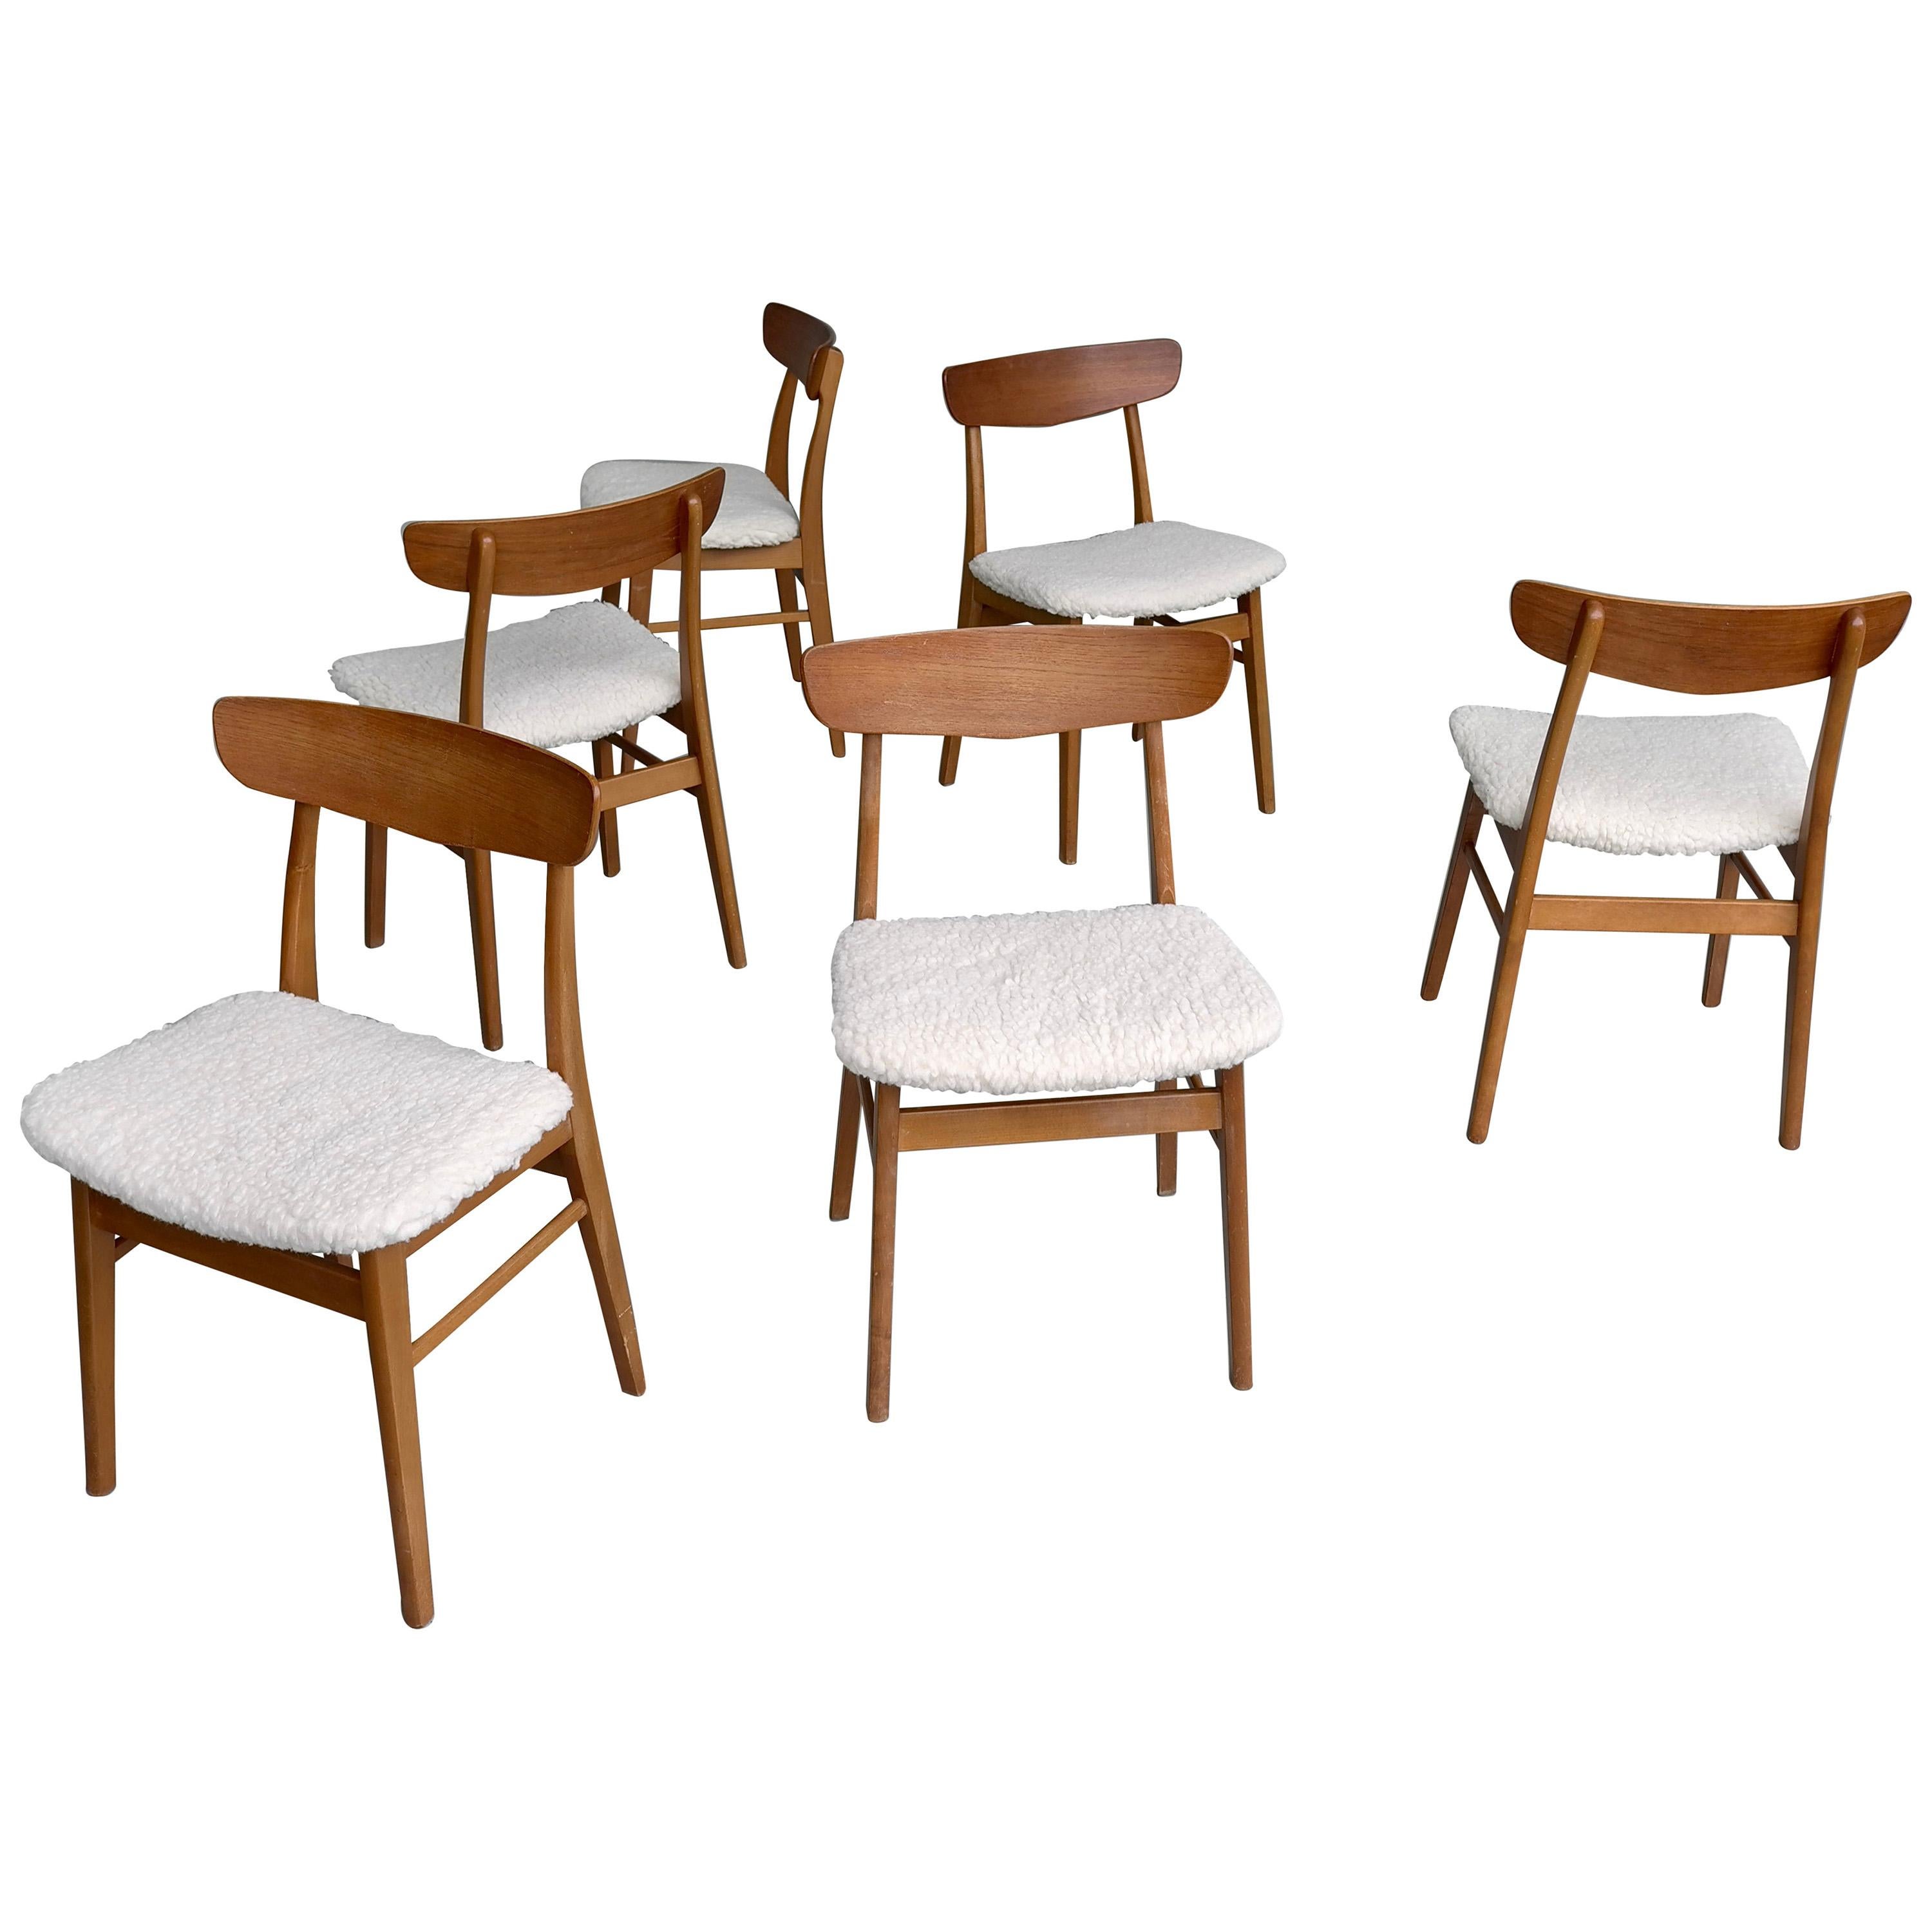 Six Teak Danish Heart Chairs with Seats in Pure Merino Wool, by Farstrup Møbler